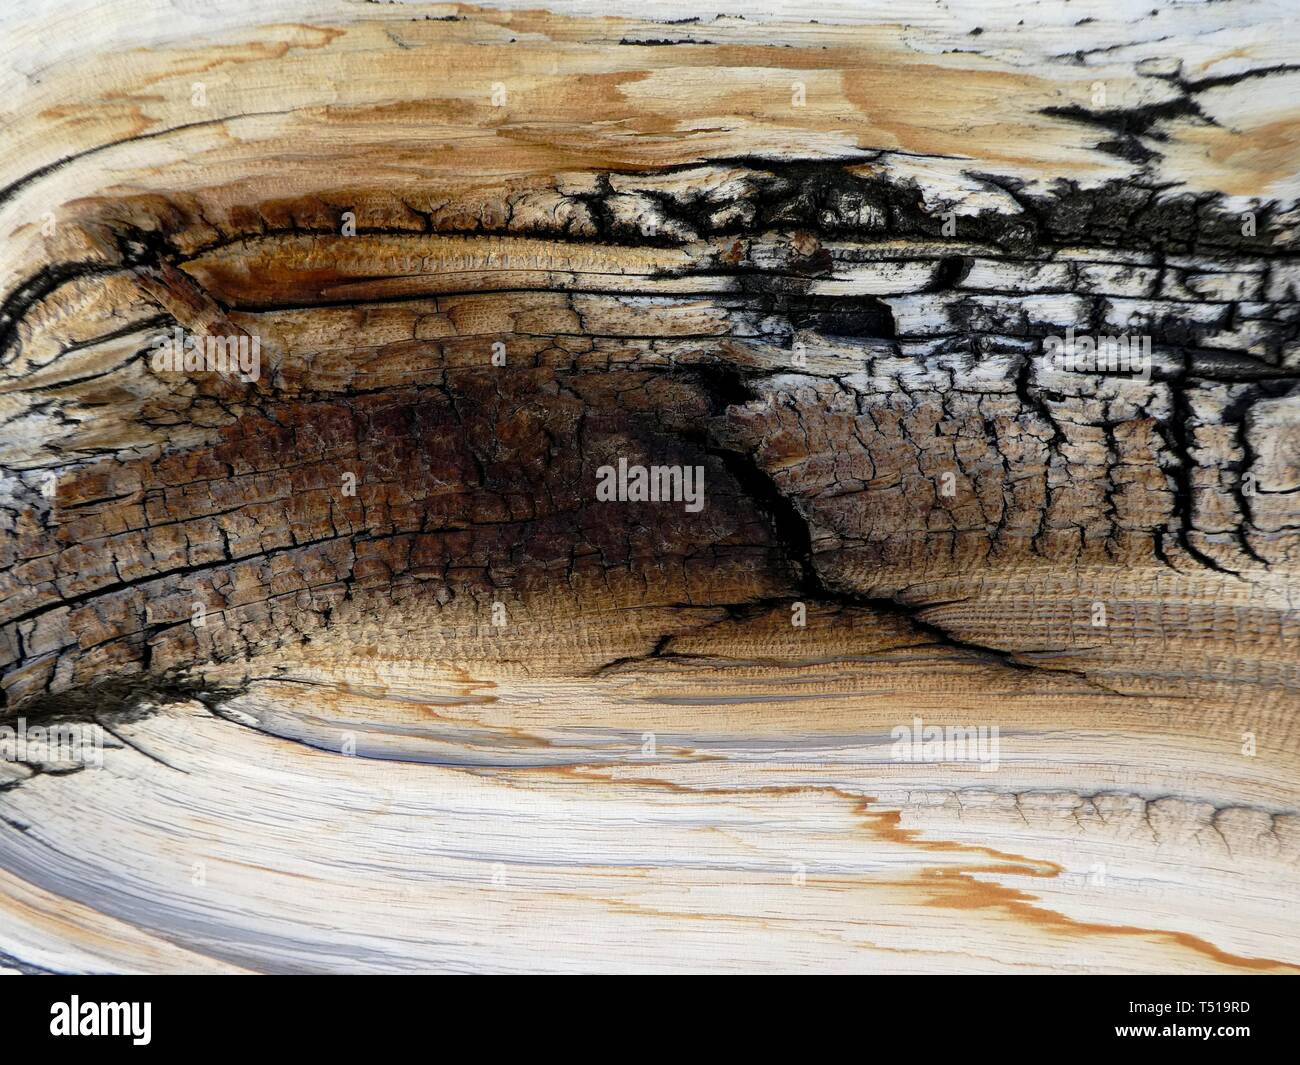 Closeup look at an ancient Bristlecone Pine tree trunk in the White Mountains, California Stock Photo